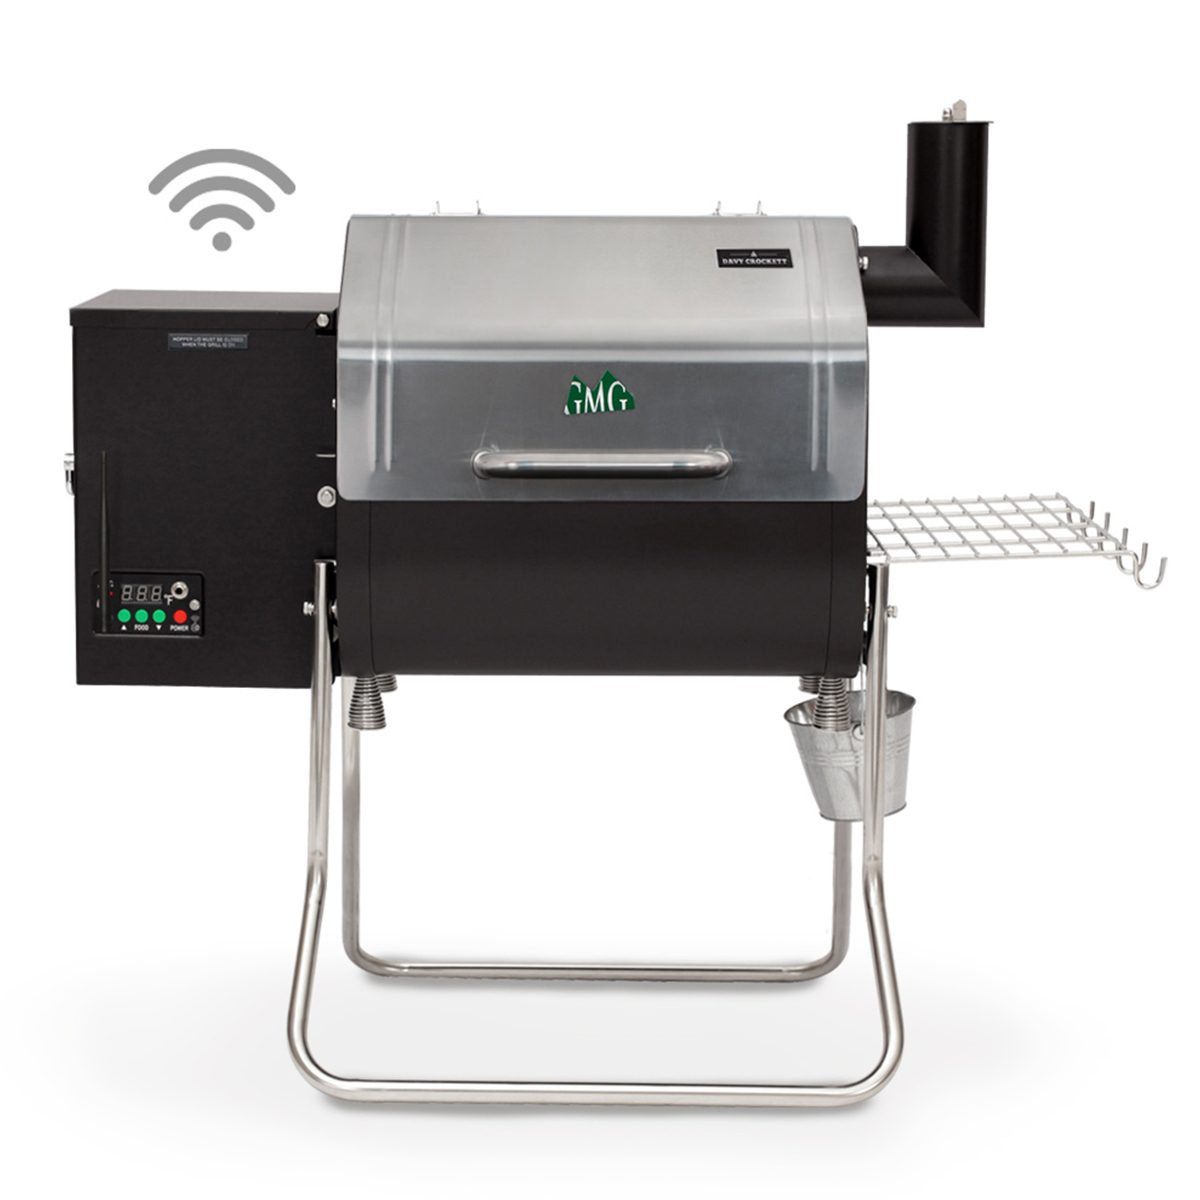 The Best Pellet Smoker Grills of 2022 The Family Handyman